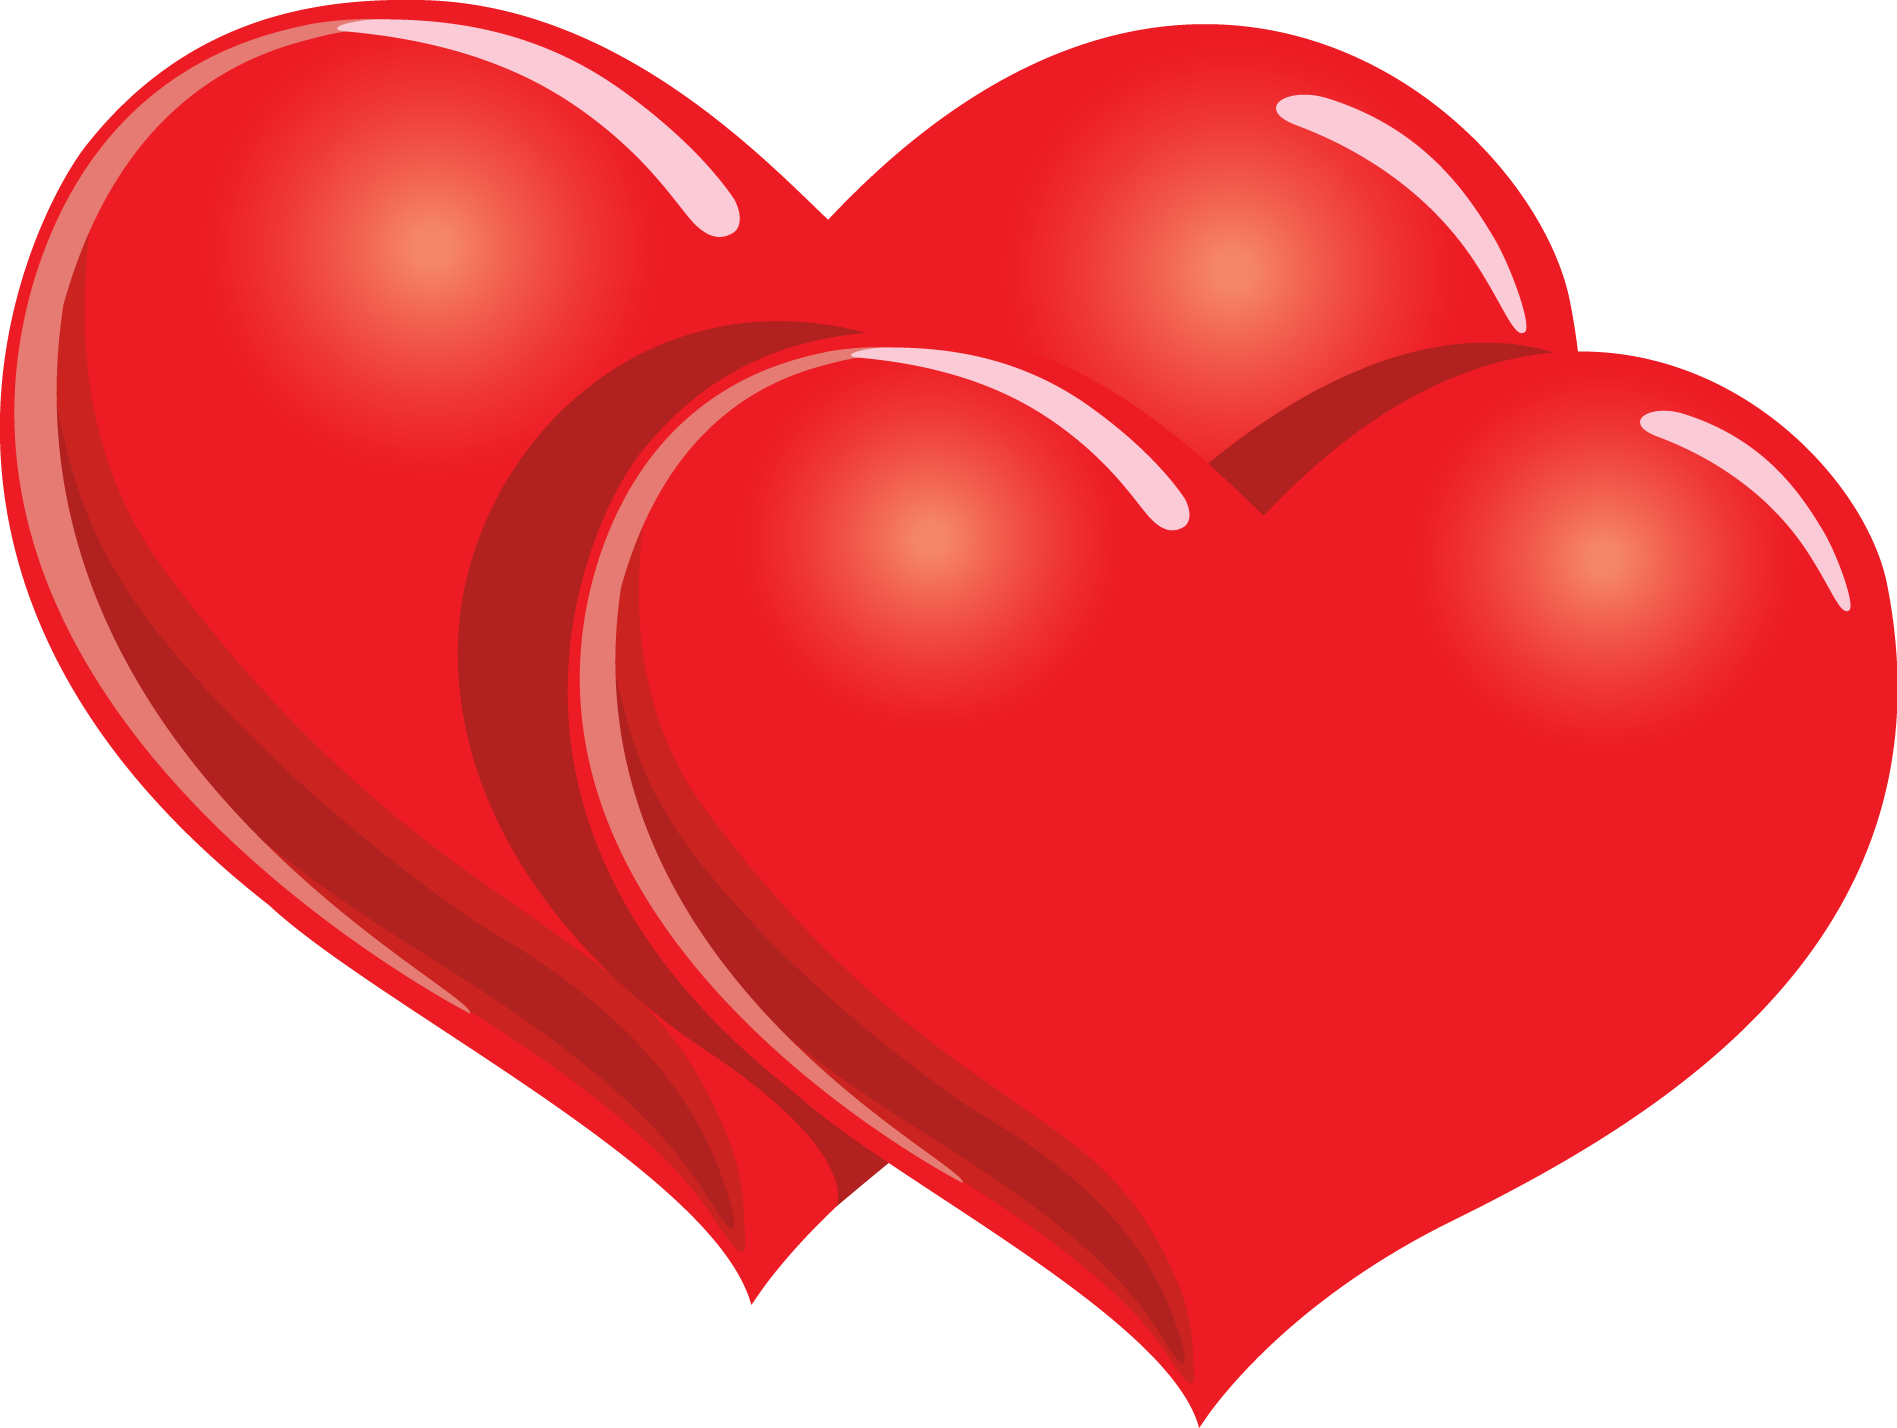 Two Hearts Clipart | Clipart Panda - Free Clipart Images